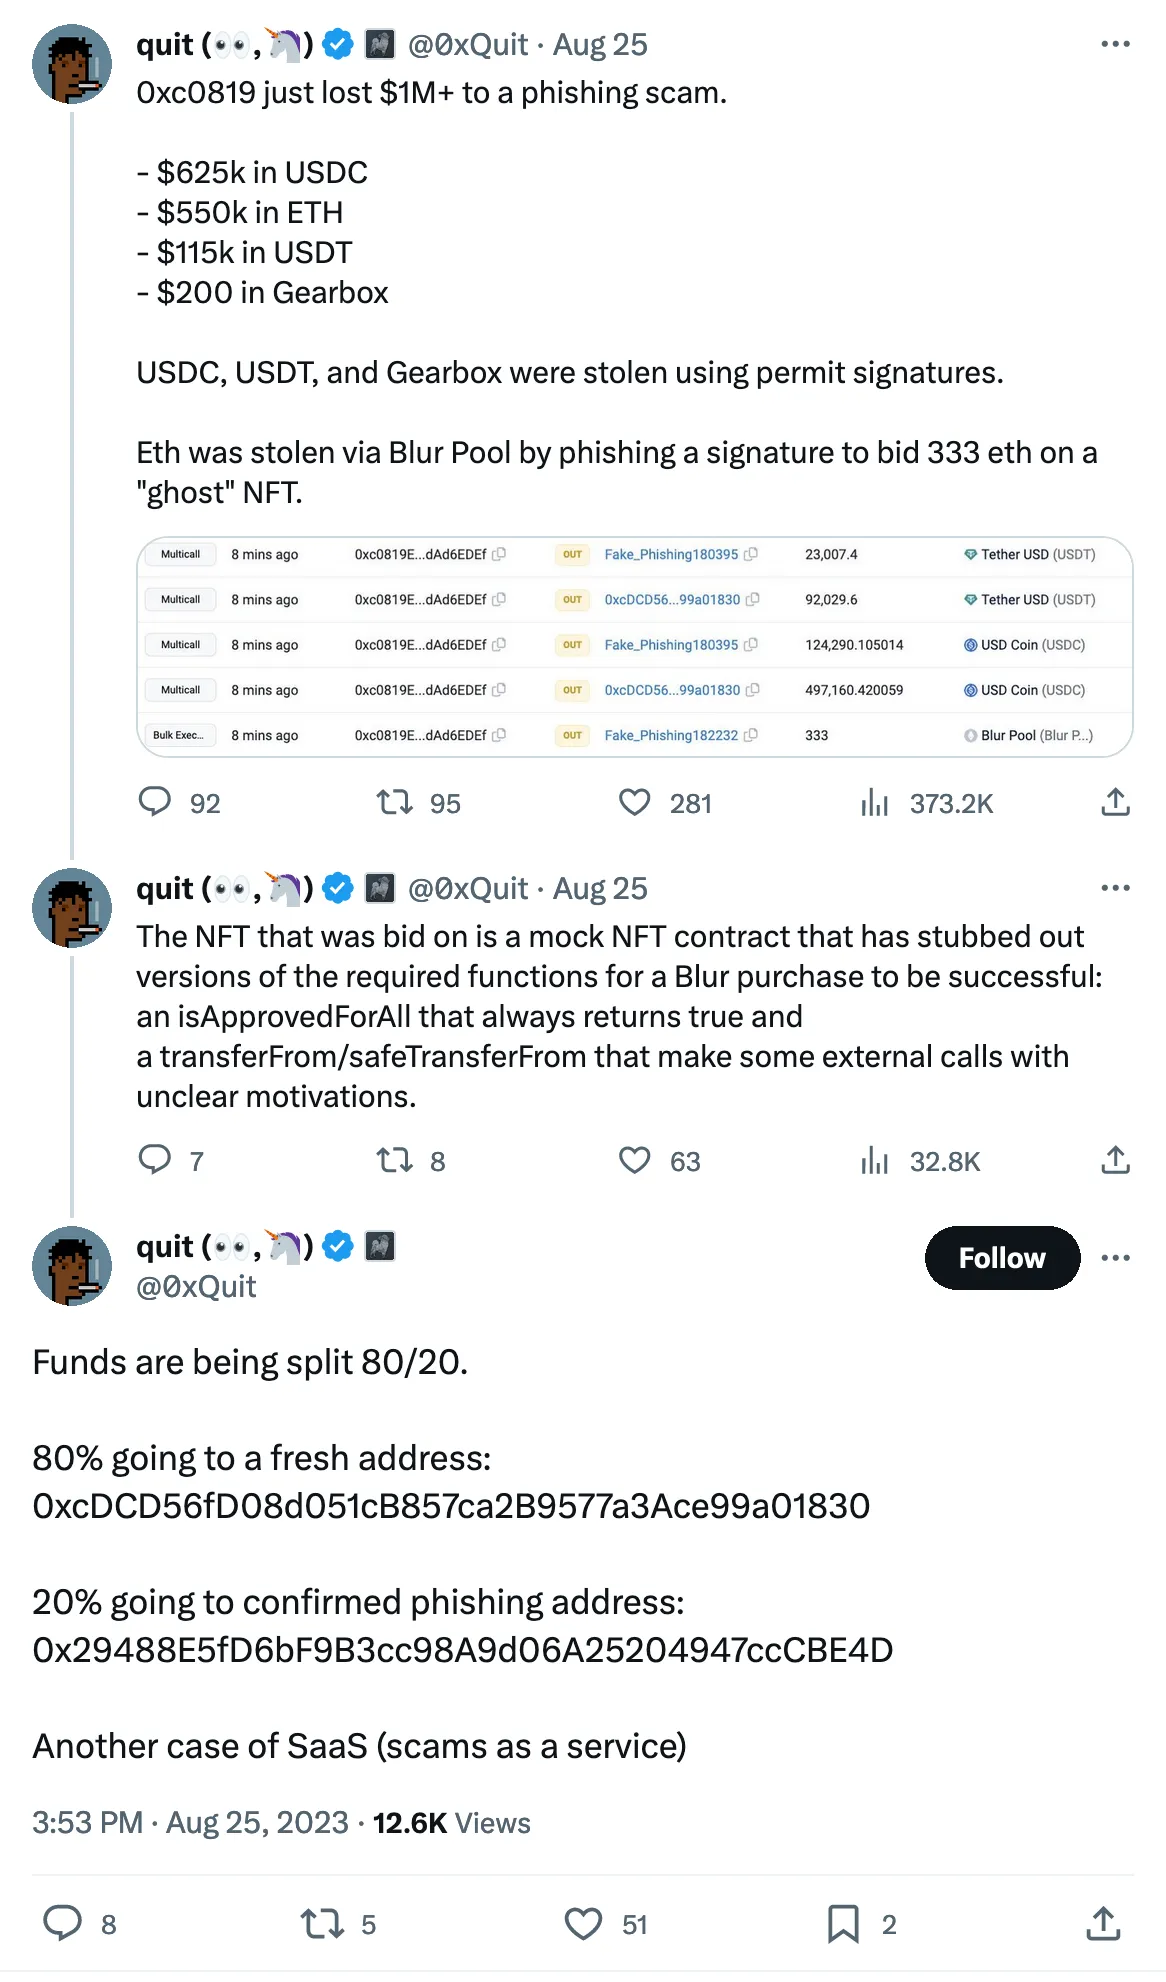 0xc0819 just lost $1M+ to a phishing scam.

- $625k in USDC
- $550k in ETH
- $115k in USDT
- $200 in Gearbox

USDC, USDT, and Gearbox were stolen using permit signatures.

Eth was stolen via Blur Pool by phishing a signature to bid 333 eth on a "ghost" NFT. 
Tweeted at 3:18 PM · Aug 25, 2023

The NFT that was bid on is a mock NFT contract that has stubbed out versions of the required functions for a Blur purchase to be successful: an isApprovedForAll that always returns true and 
a transferFrom/safeTransferFrom that make some external calls with unclear motivations. 
Tweeted at Aug 25

Funds are being split 80/20.

80% going to a fresh address: 0xcDCD56fD08d051cB857ca2B9577a3Ace99a01830

20% going to confirmed phishing address:
0x29488E5fD6bF9B3cc98A9d06A25204947ccCBE4D

Another case of SaaS (scams as a service) 
Tweeted at Aug 25